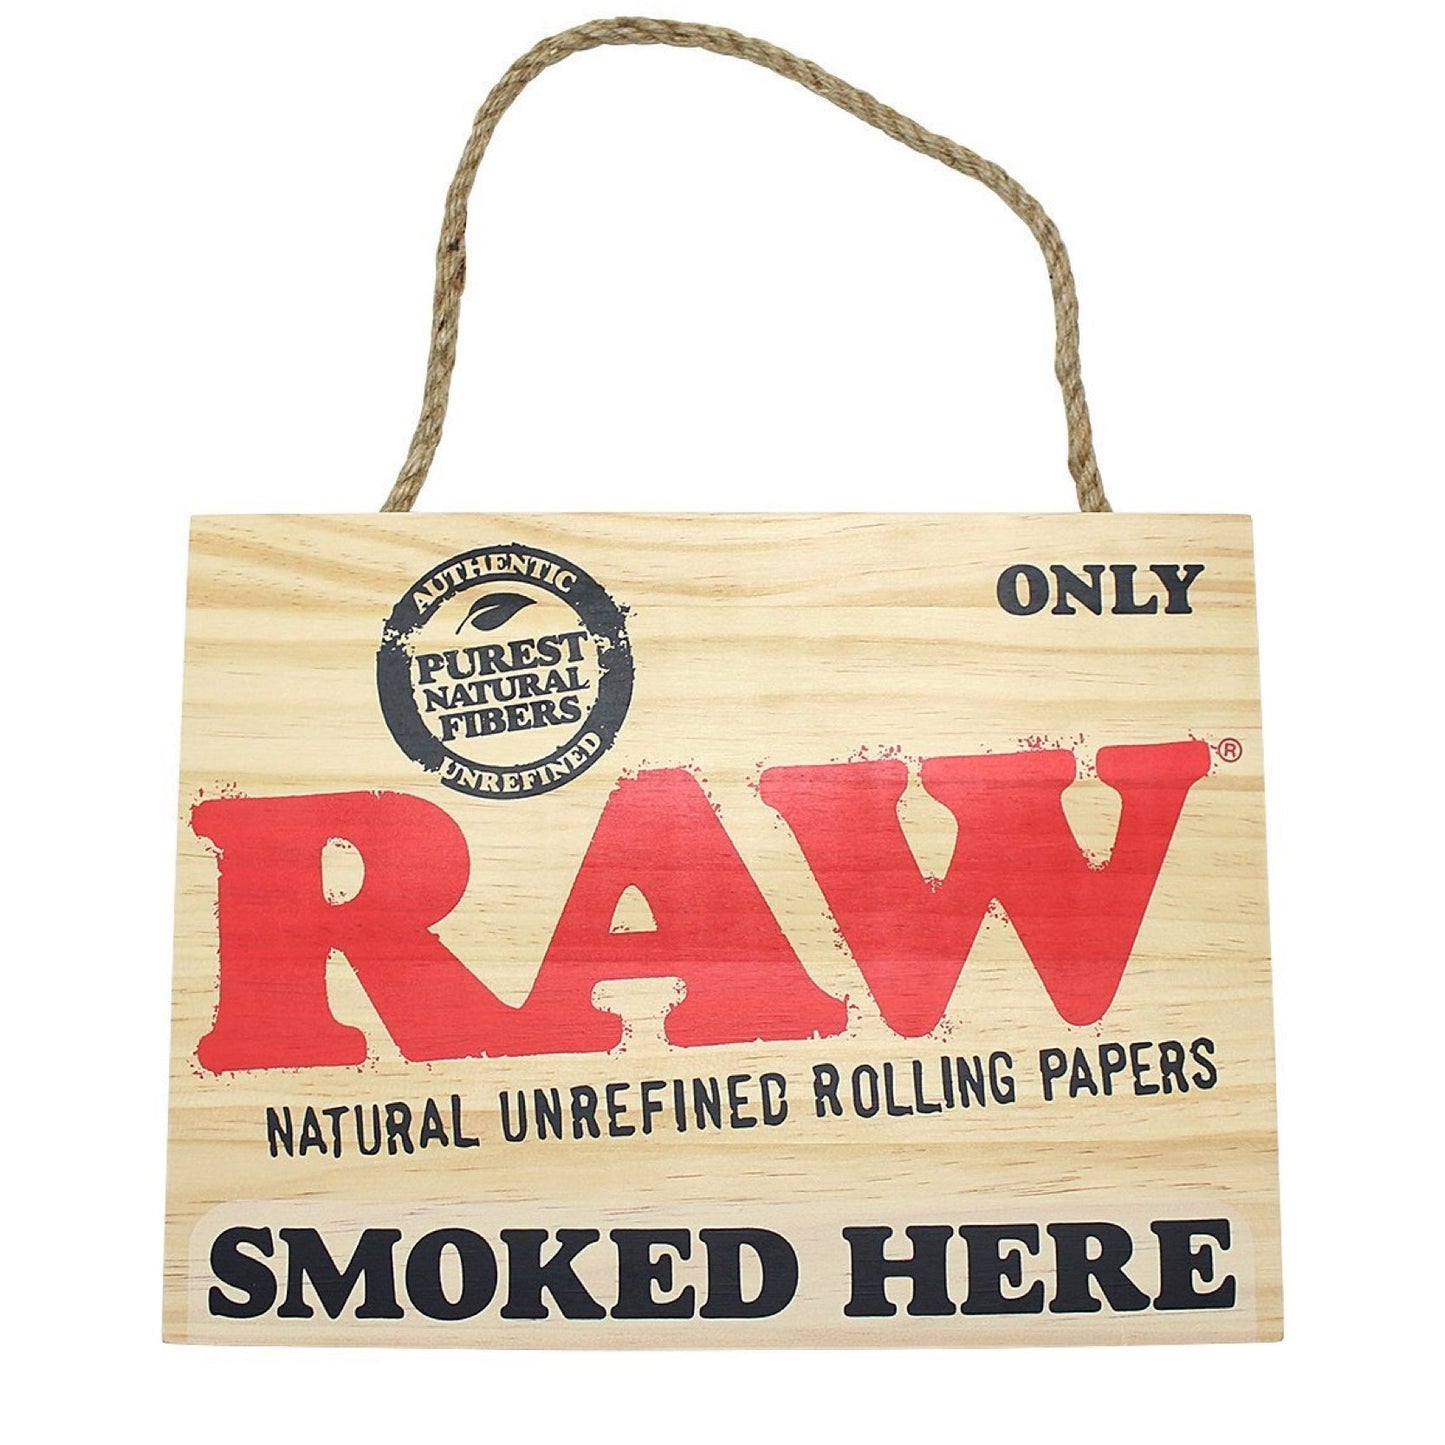 Raw® Rolling Papers “Smoked Here” Wooden Sign by RAW Rolling Papers | Mission Dispensary